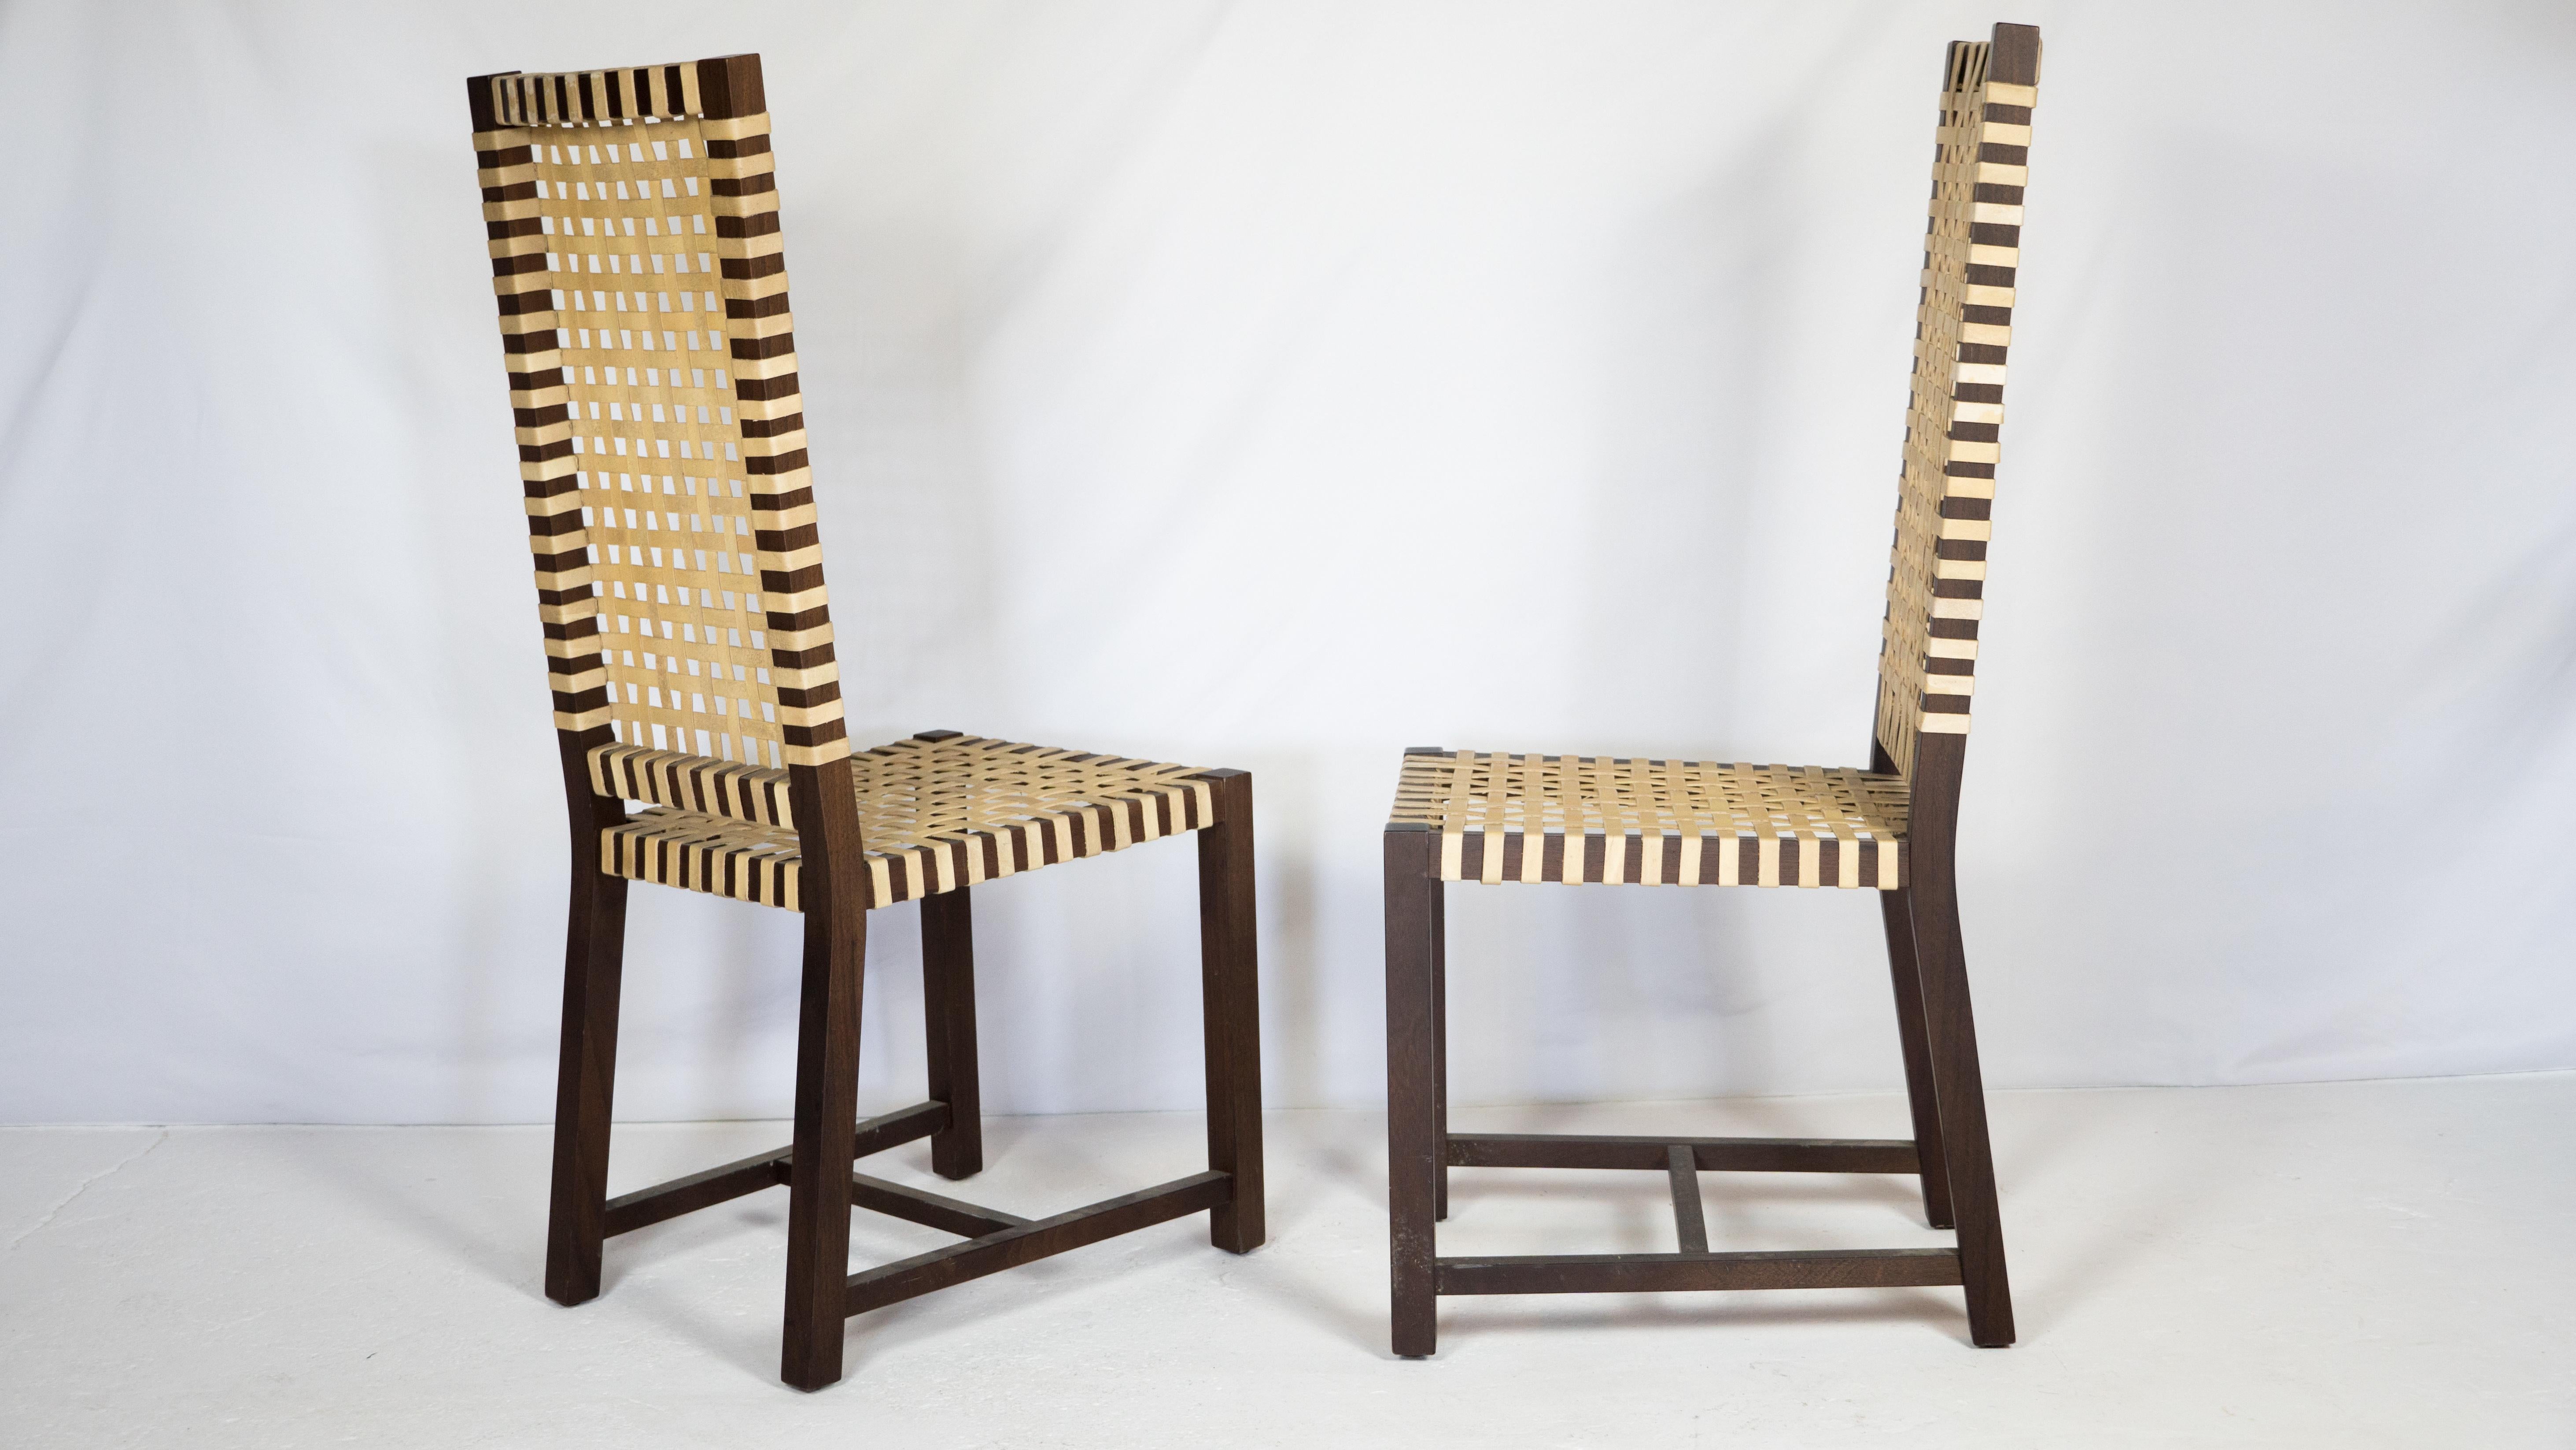 Late 20th Century 1980s Italian Architectural Otto 121' High Back Chairs by Paola Navone for Gerva For Sale